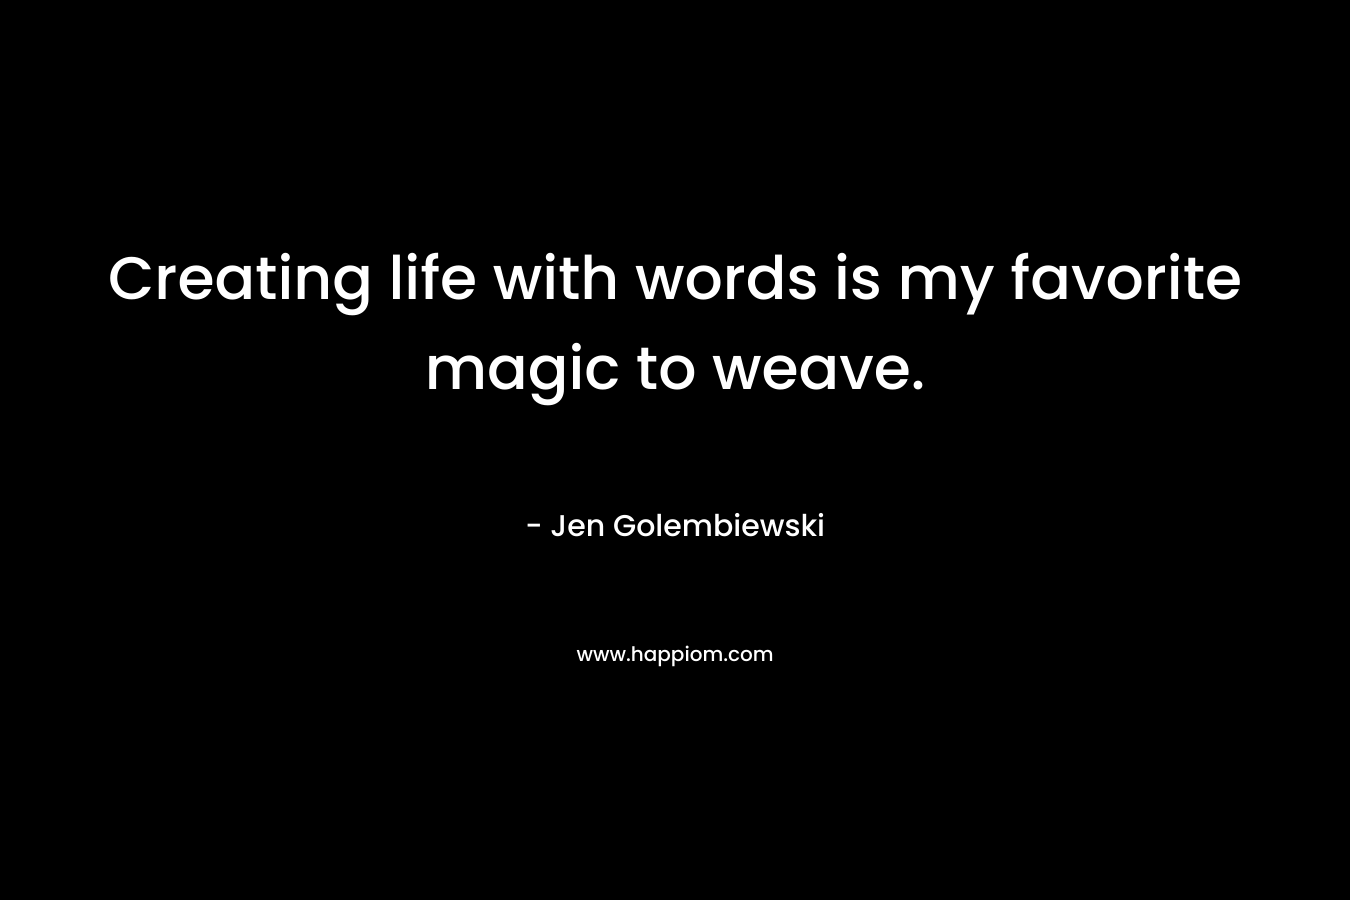 Creating life with words is my favorite magic to weave. – Jen Golembiewski